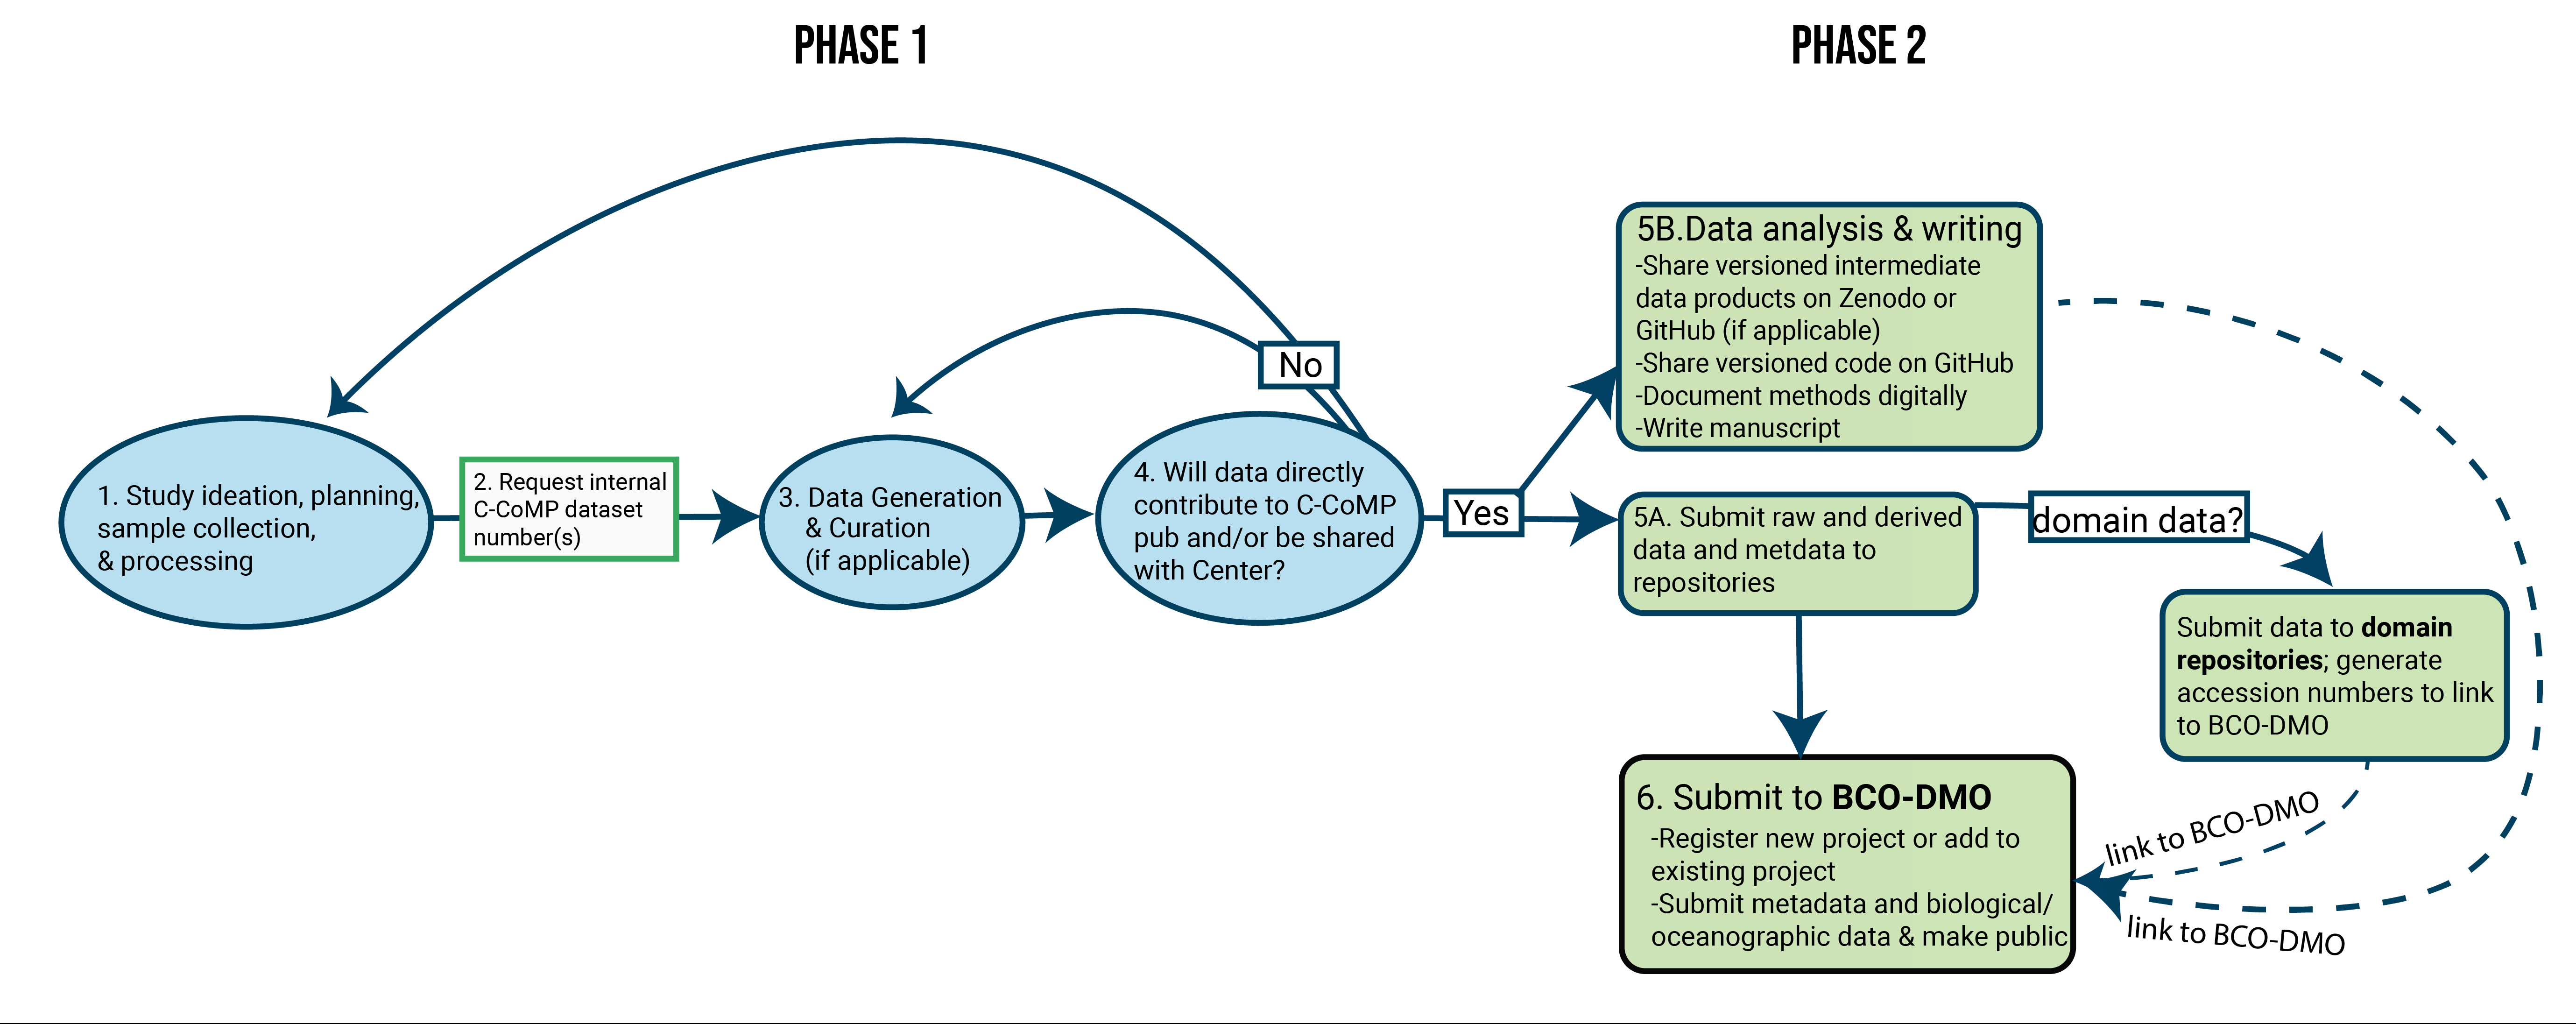 Figure flow chart outlining ordered instructions for how to deposit data in the context of the research life cycle.